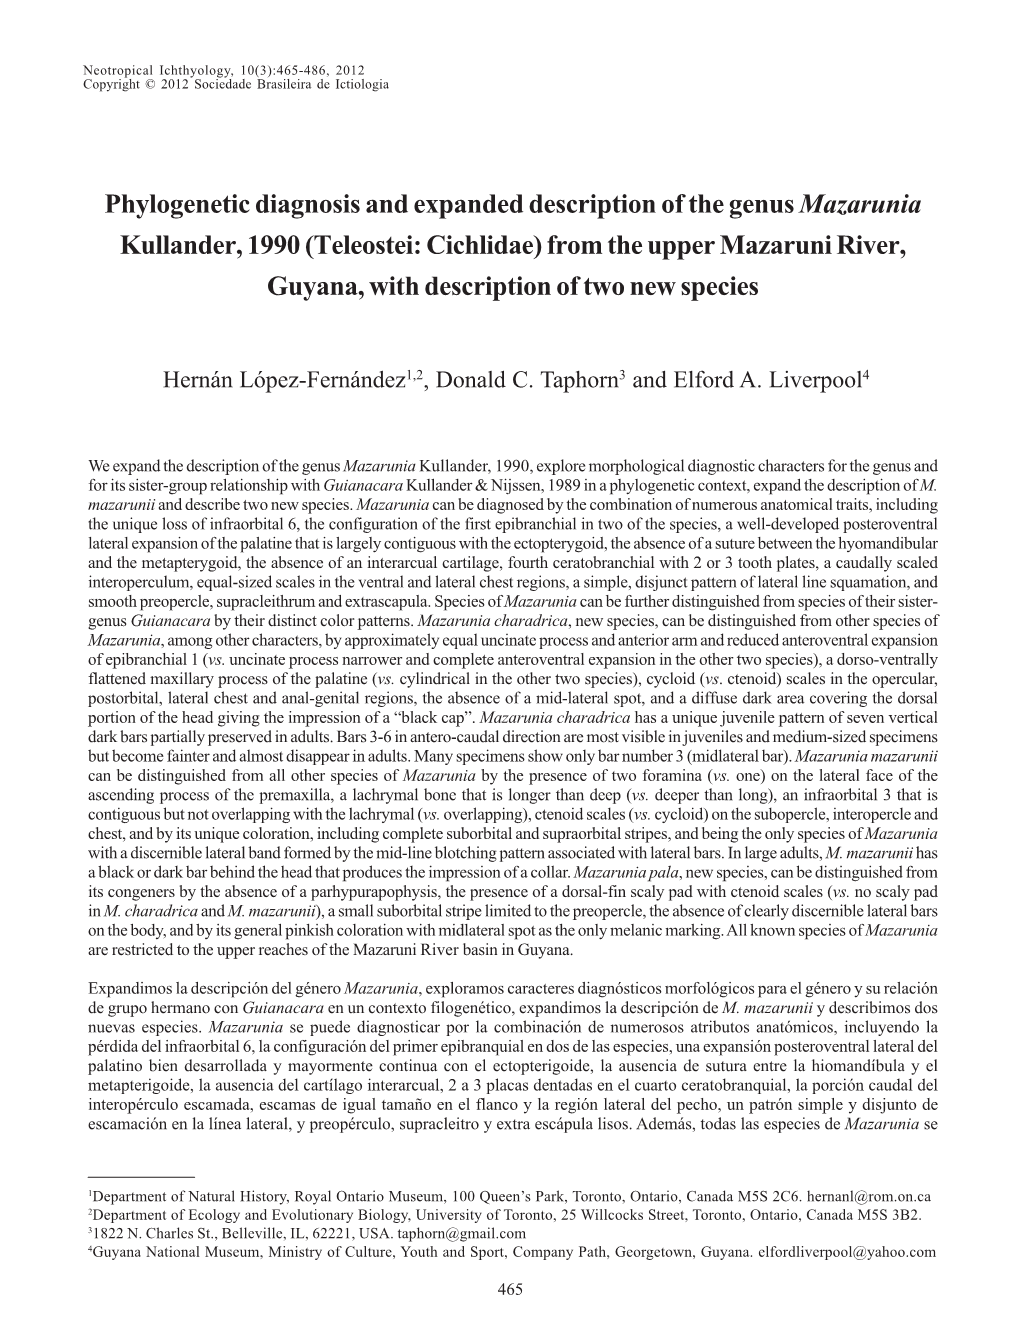 Phylogenetic Diagnosis and Expanded Description of the Genus